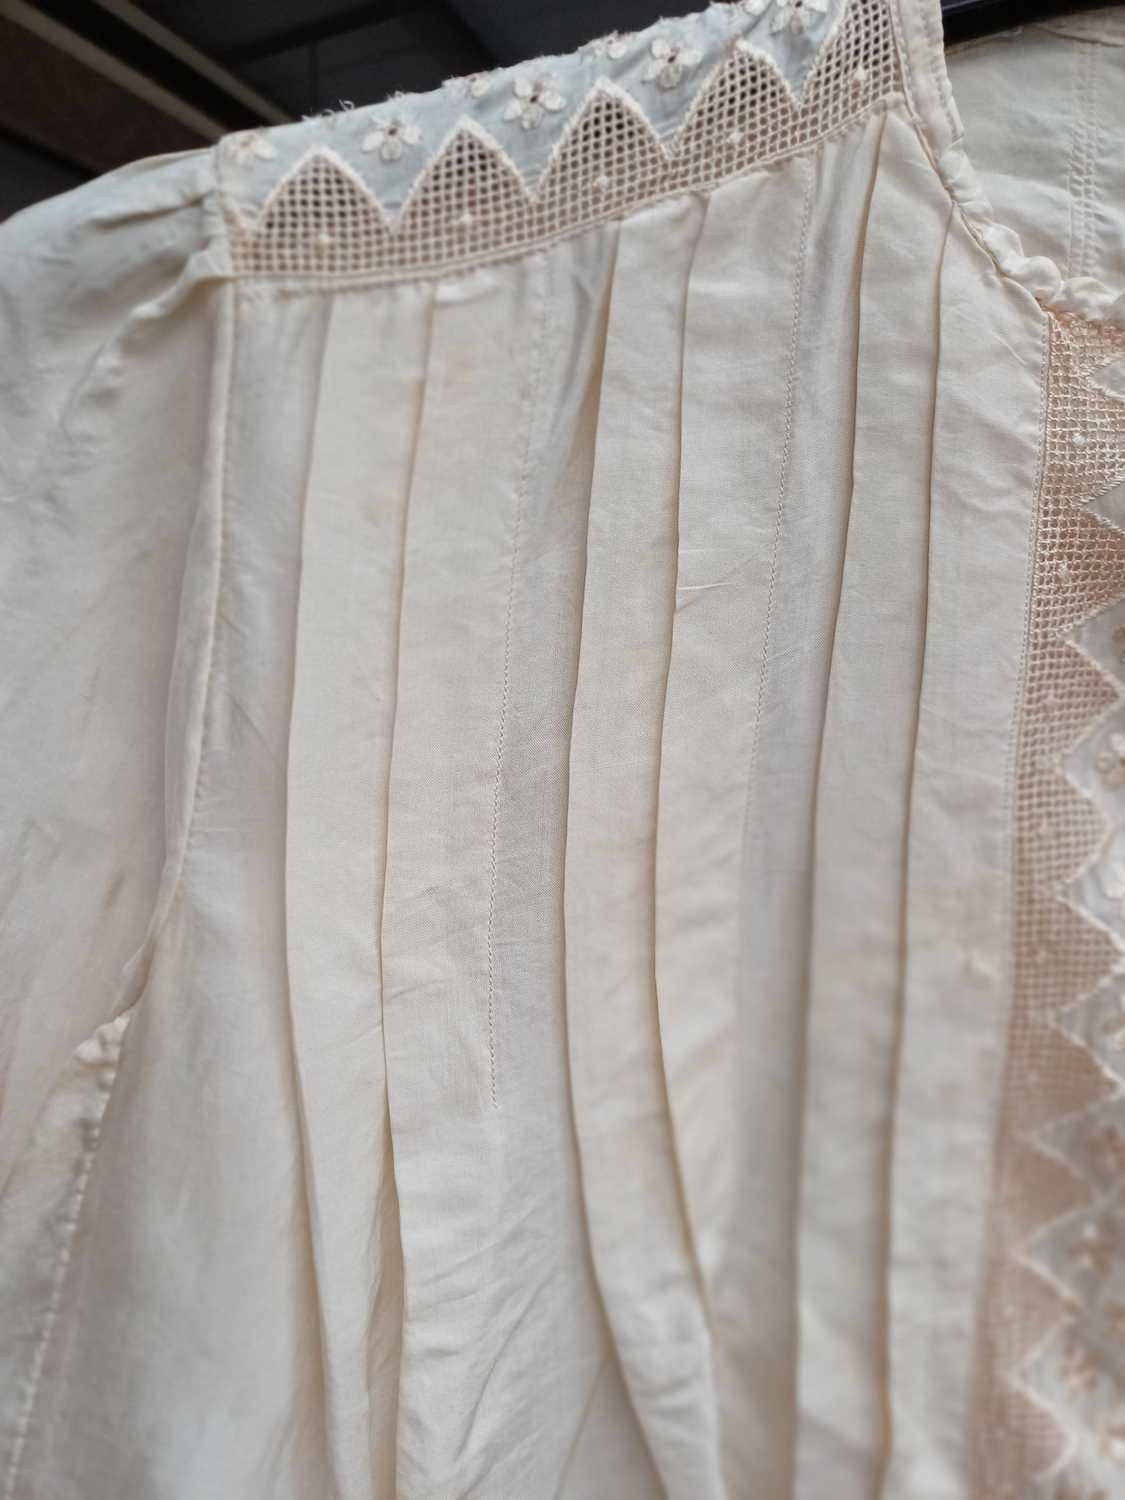 Fourteen Circa 1920-40s Ladies Tops and Shirts in white, cream, pale pink and peach in silk, satin - Image 16 of 29